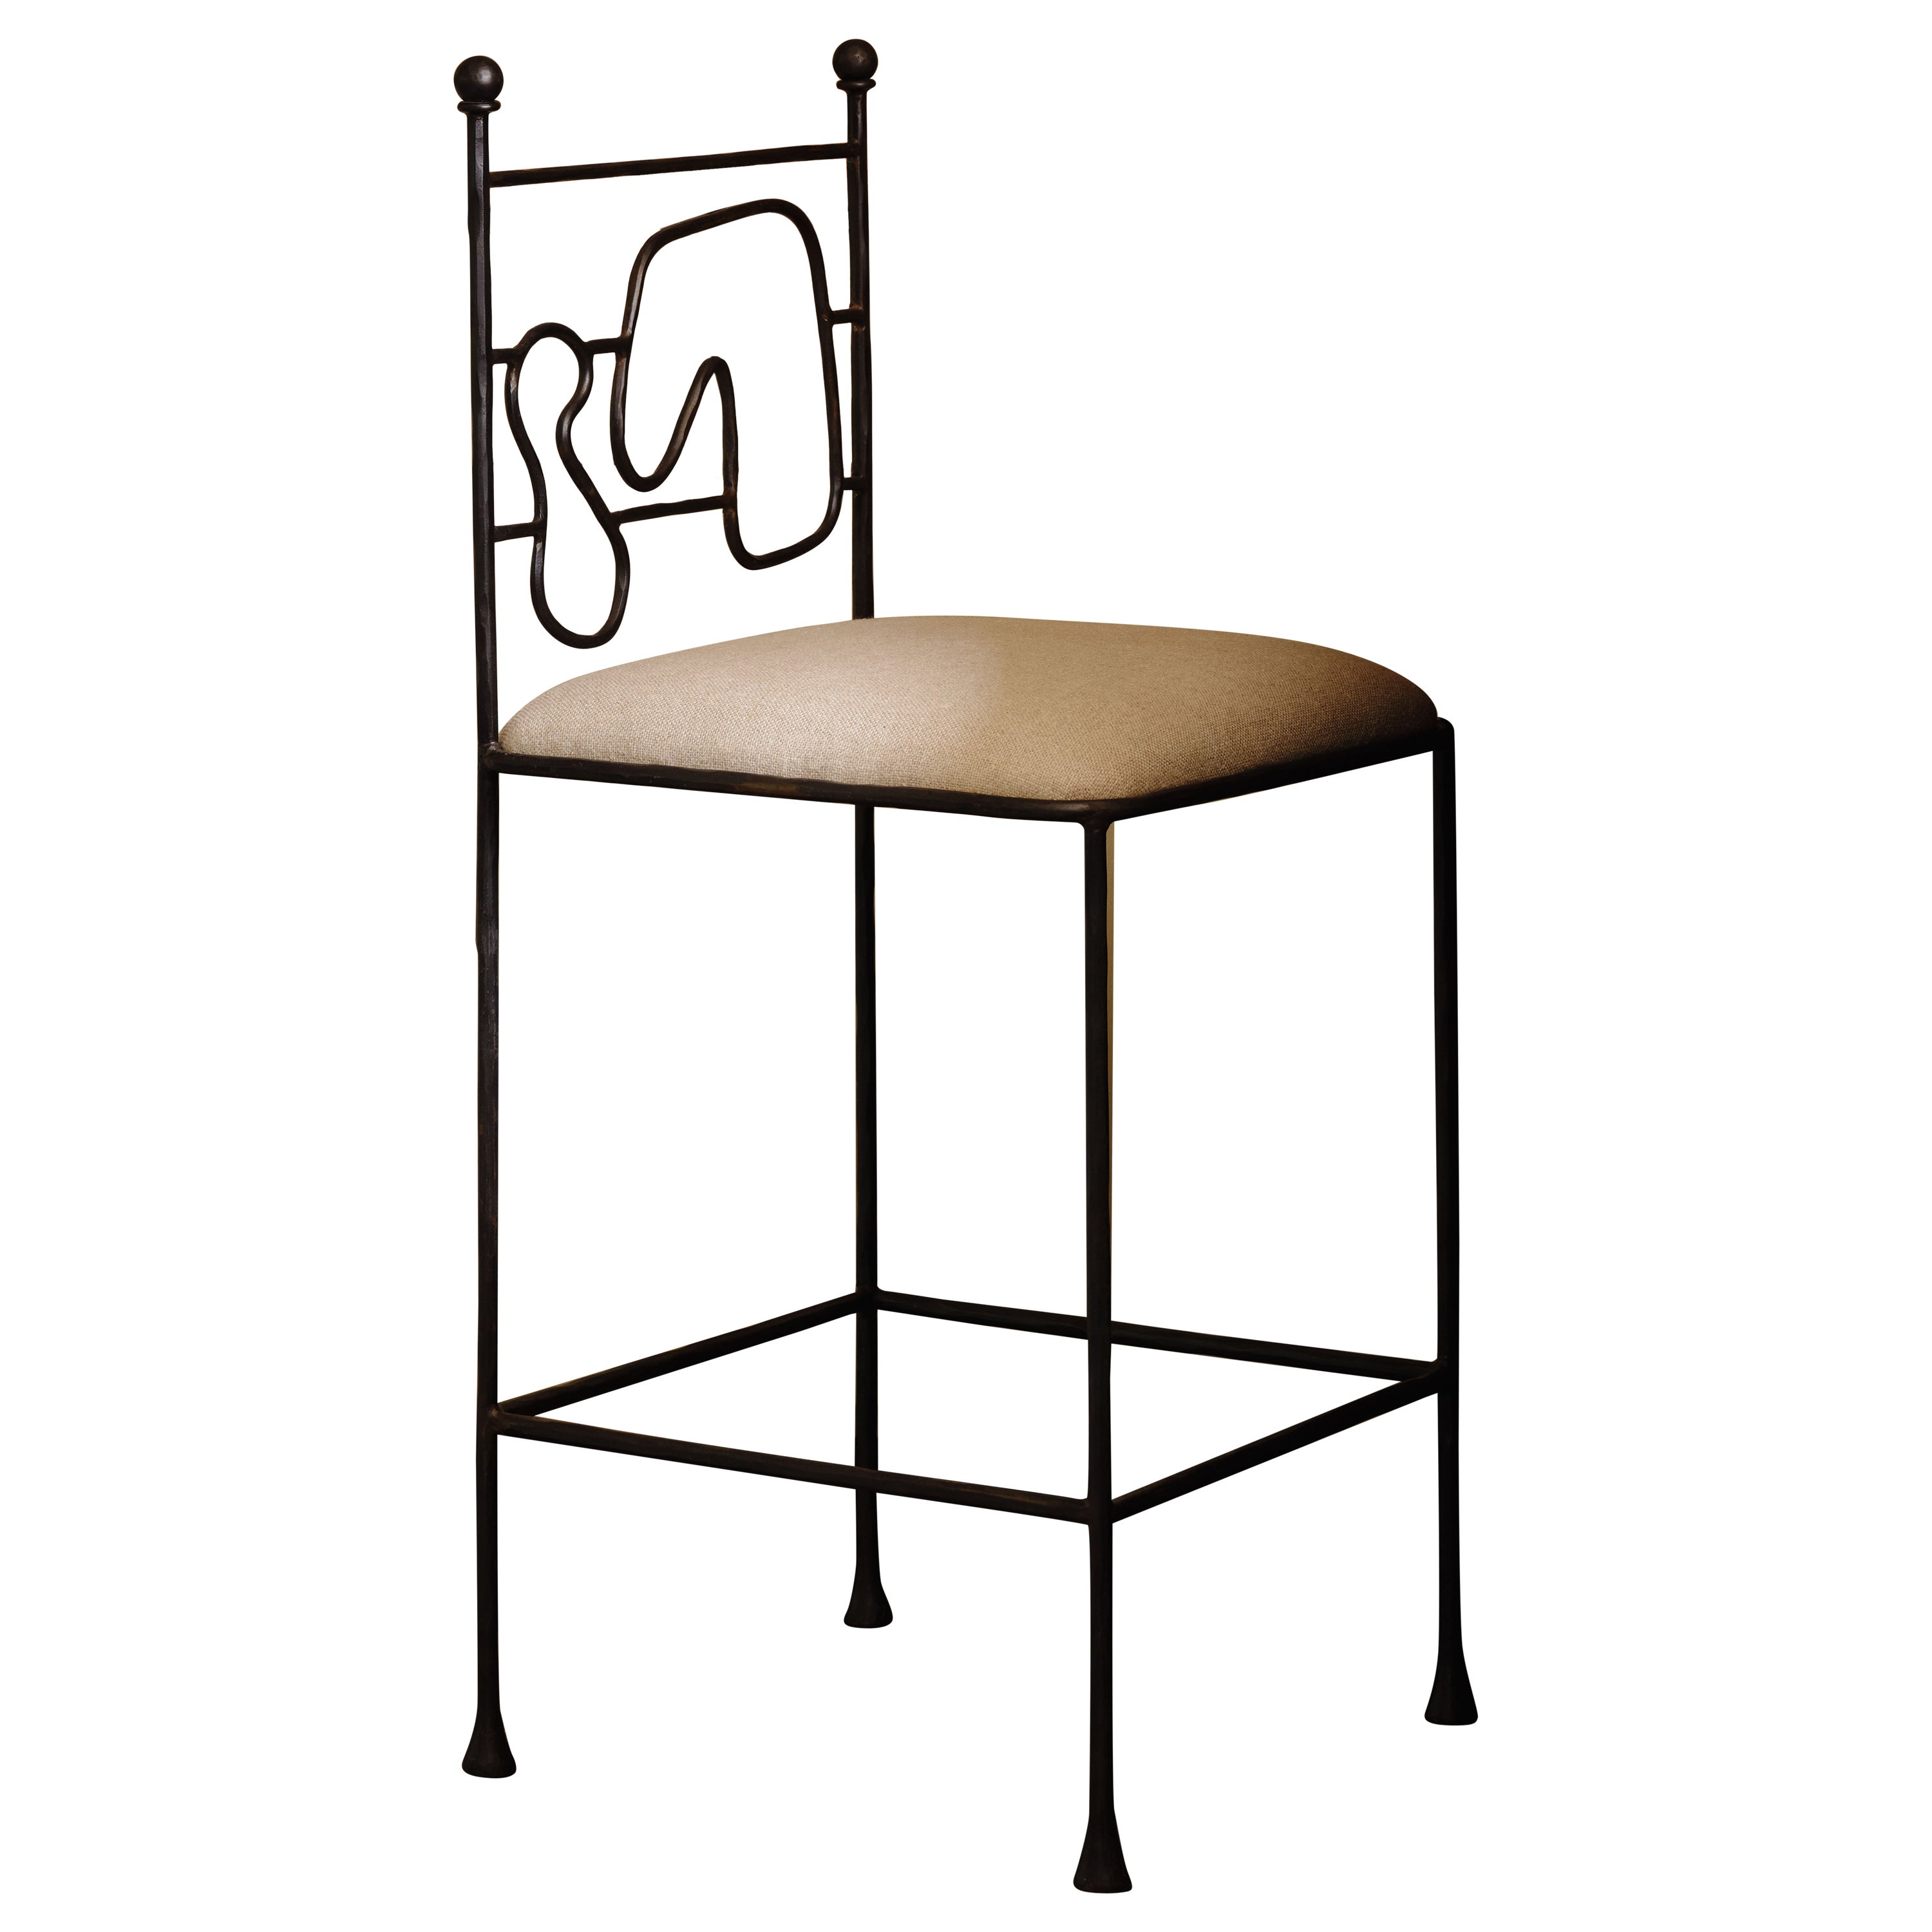 Anna Karlin Wrought Iron Counter Stool, A For Sale